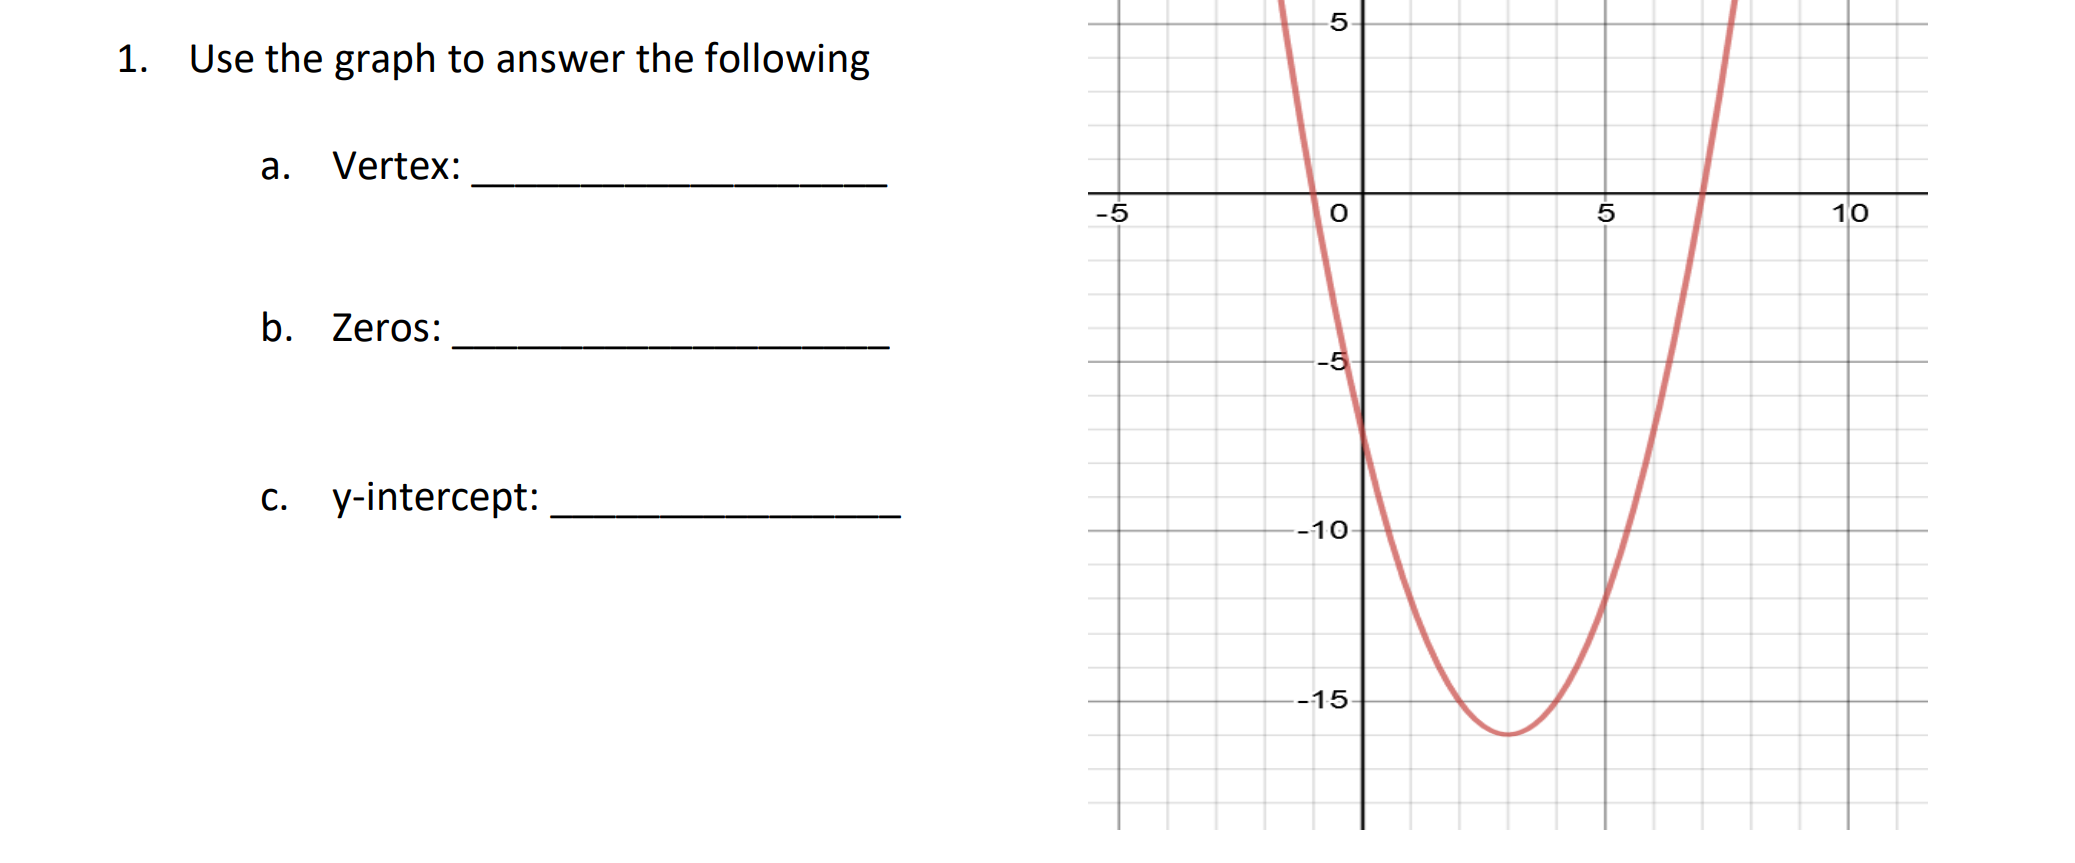 1. Use the graph to answer the following
a. Vertex:
10
b. Zeros:
-5
c. y-intercept:
-10
-15
